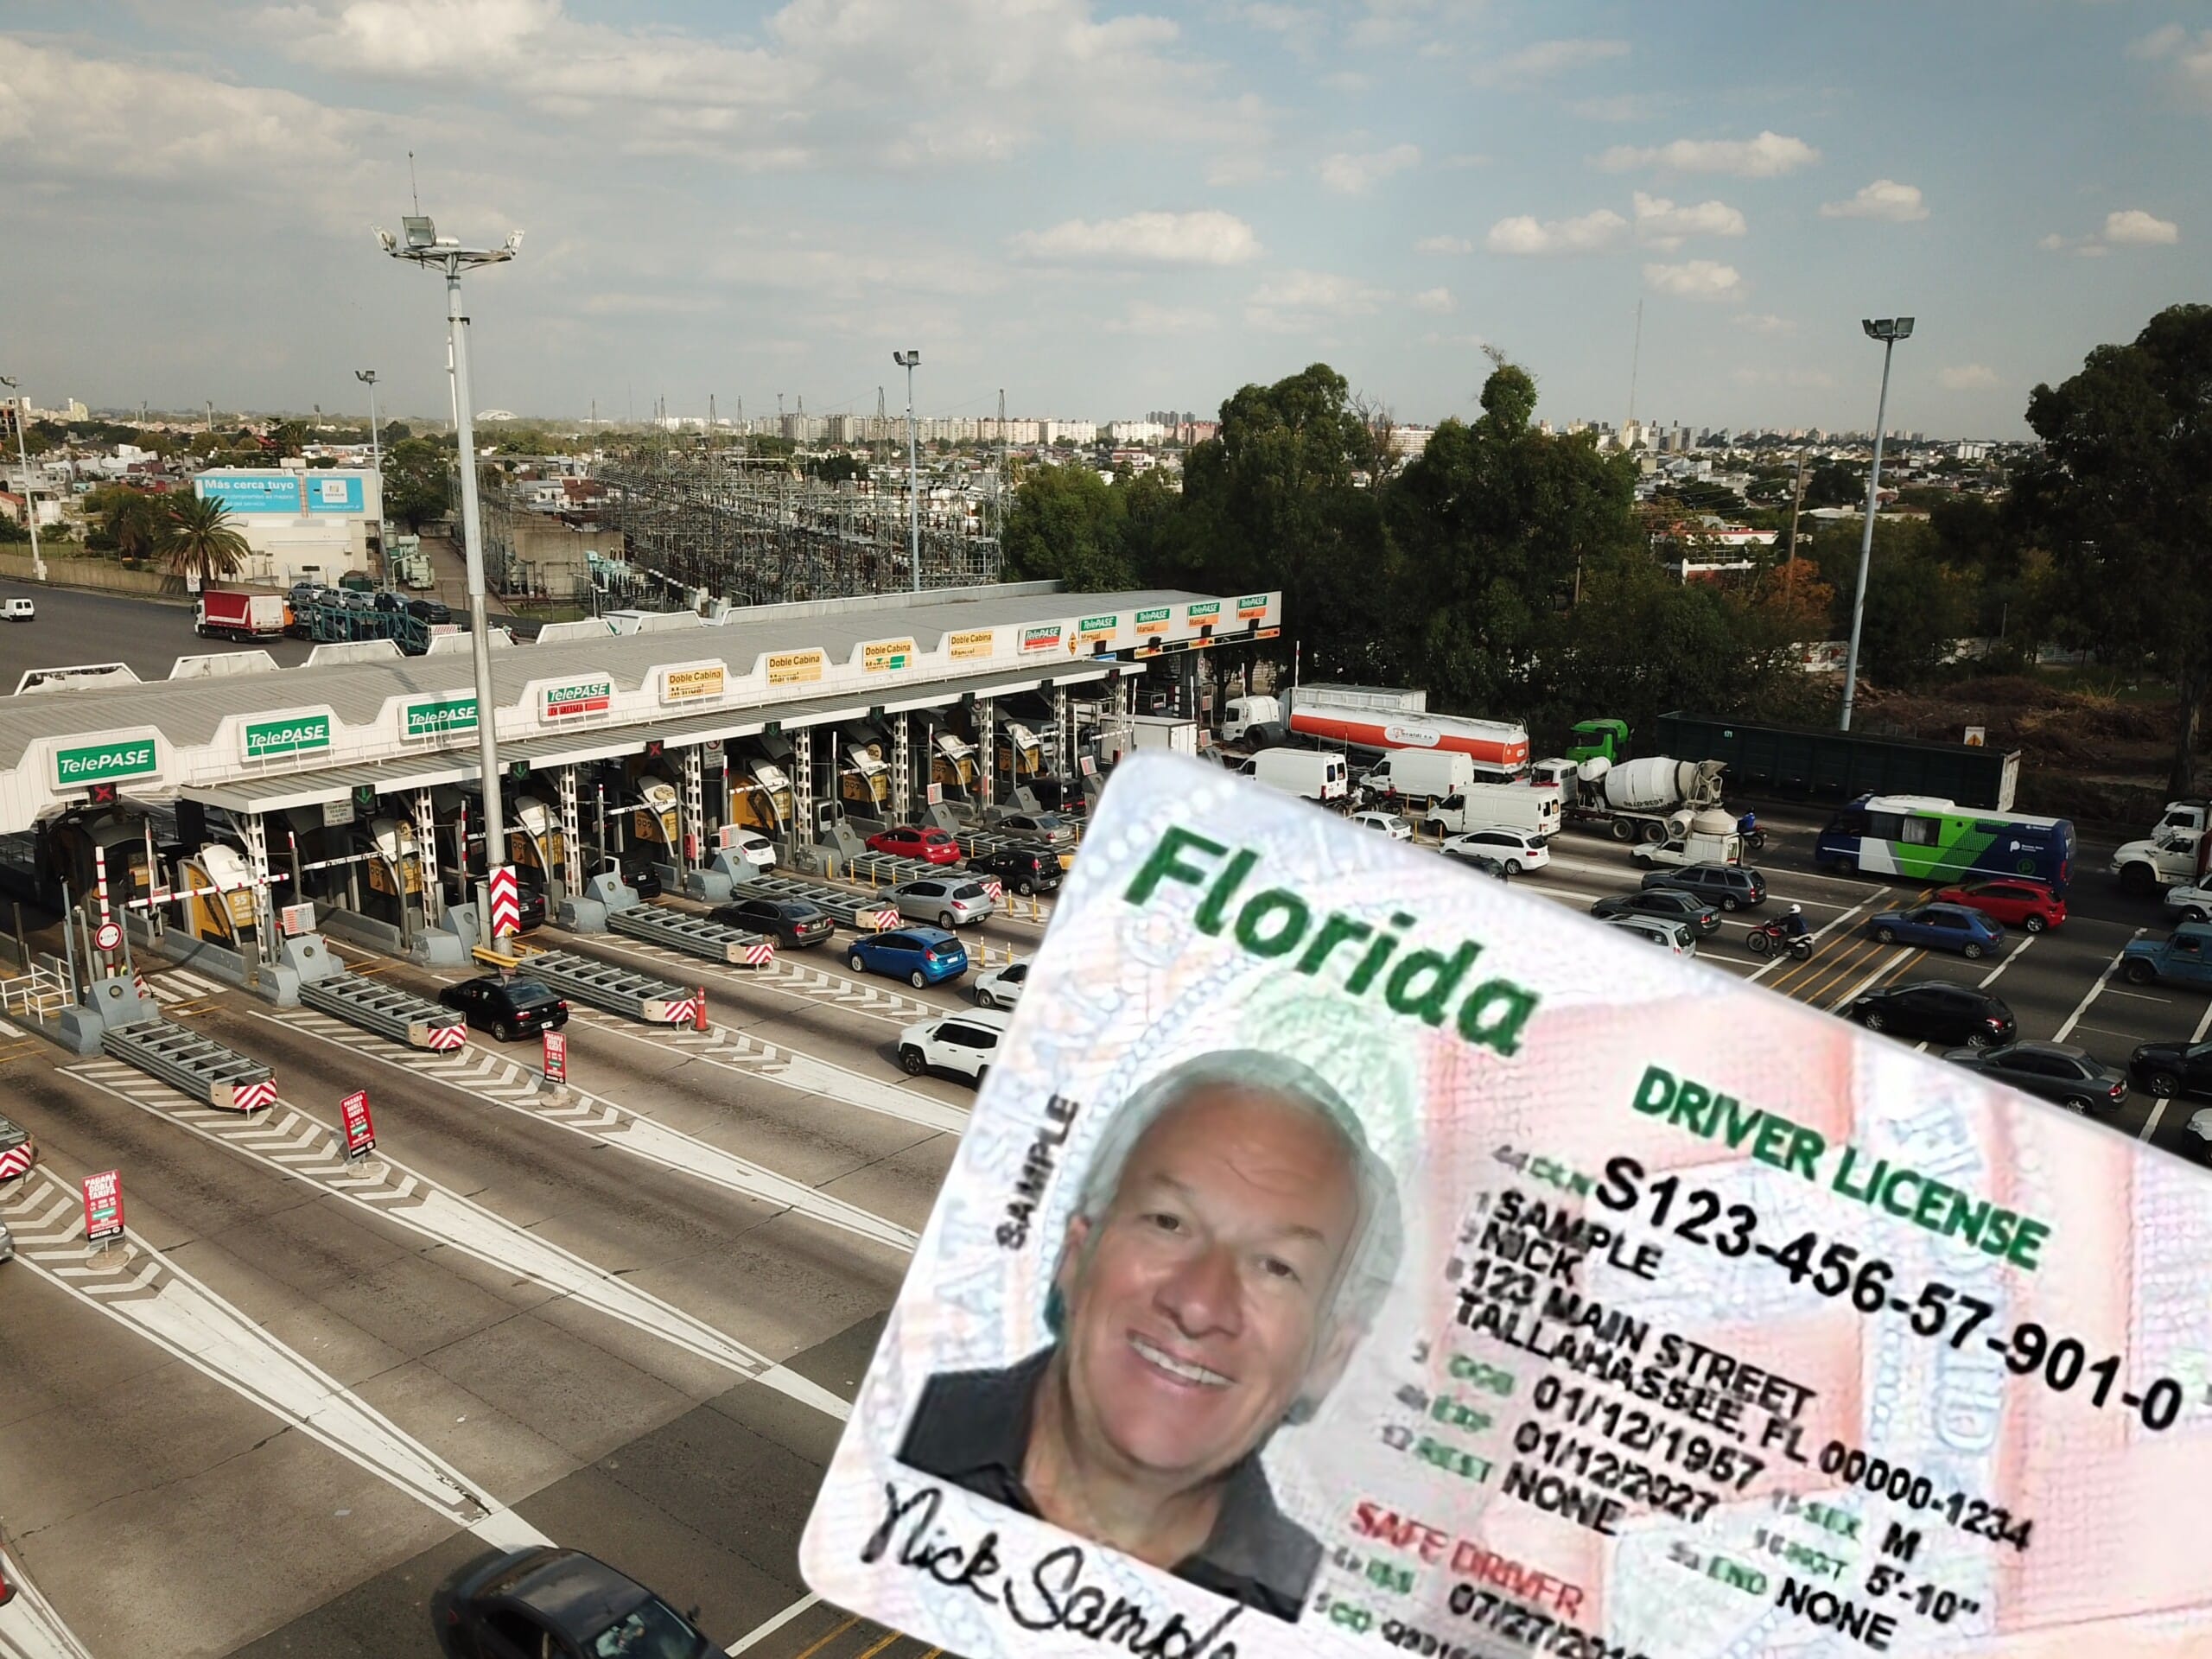 This is how you can get a driver's license in Florida as an immigrant